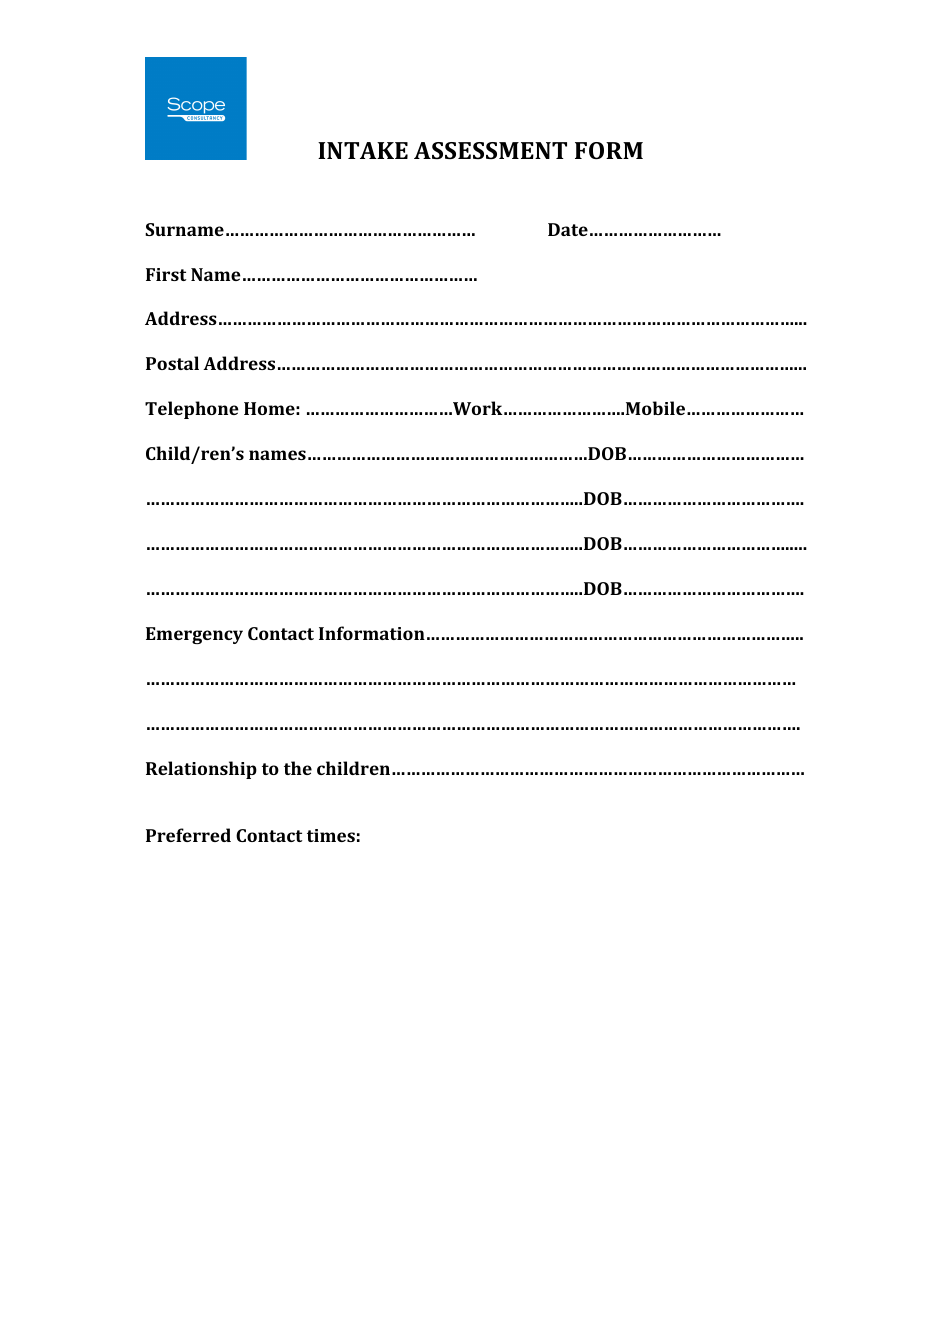 Intake Assessment Form - Scope Consultancy, Page 1